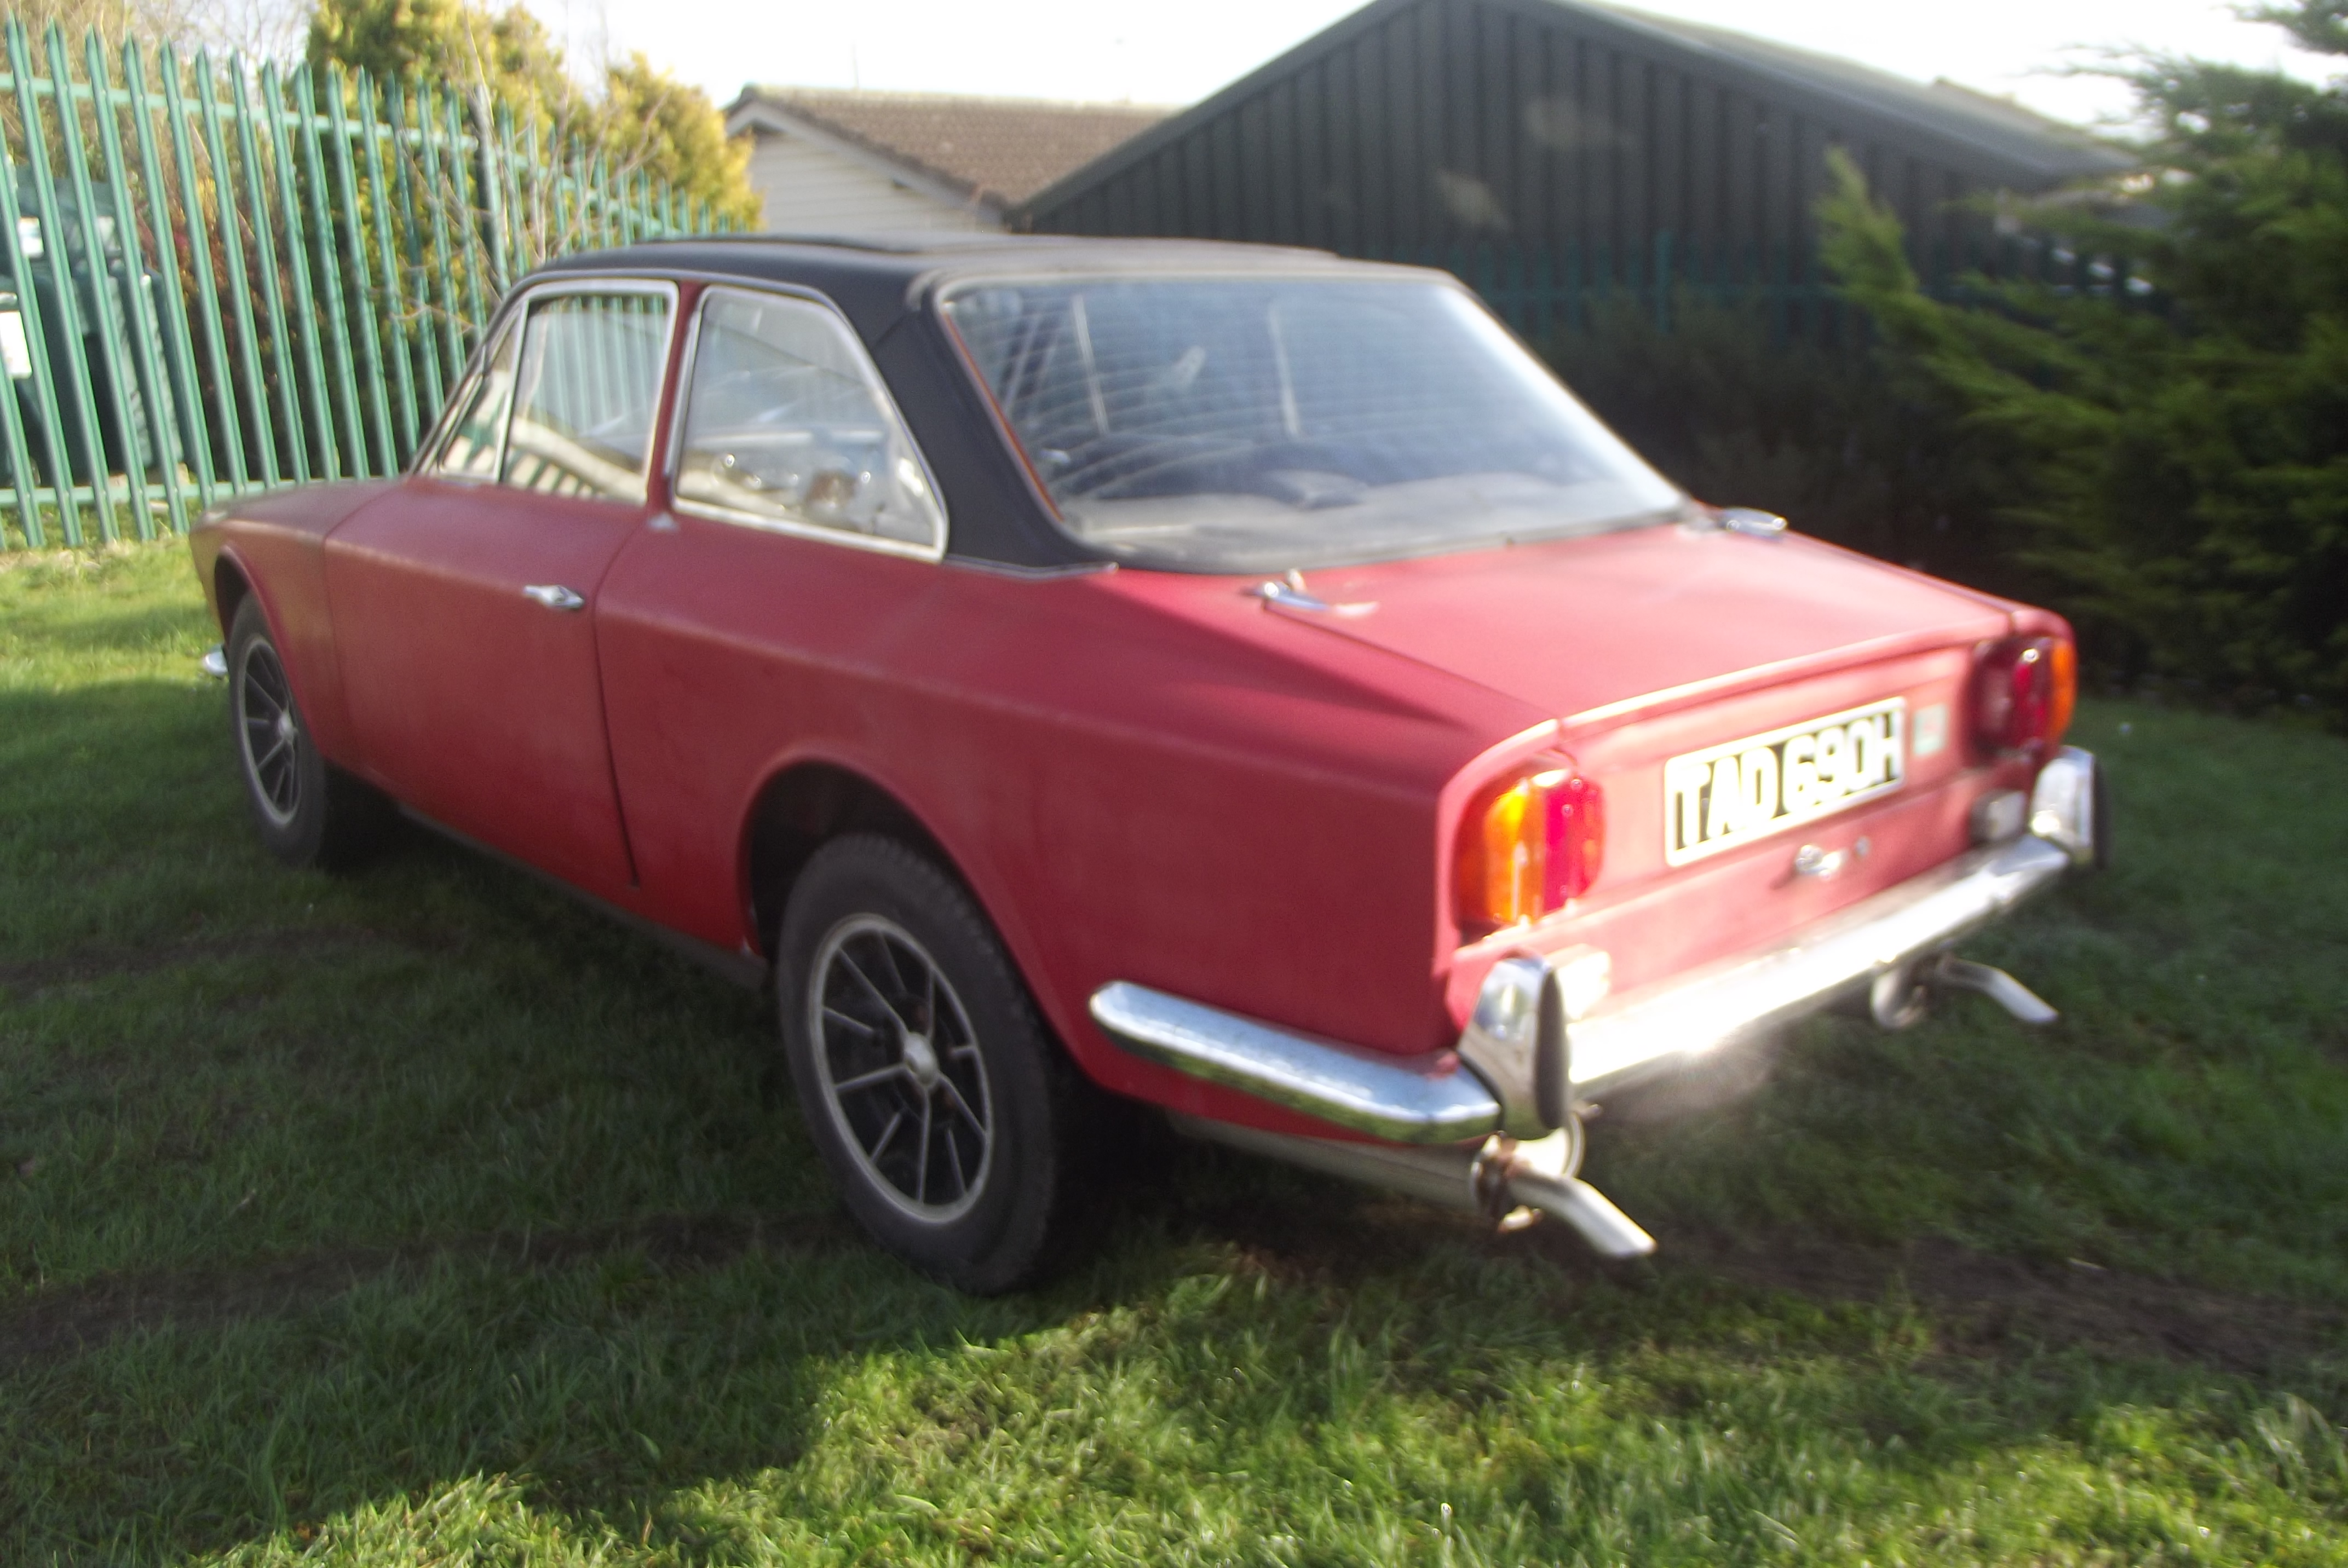 A 1969 Gilbern Genie, registration number TAD 690H, red. - Image 2 of 2